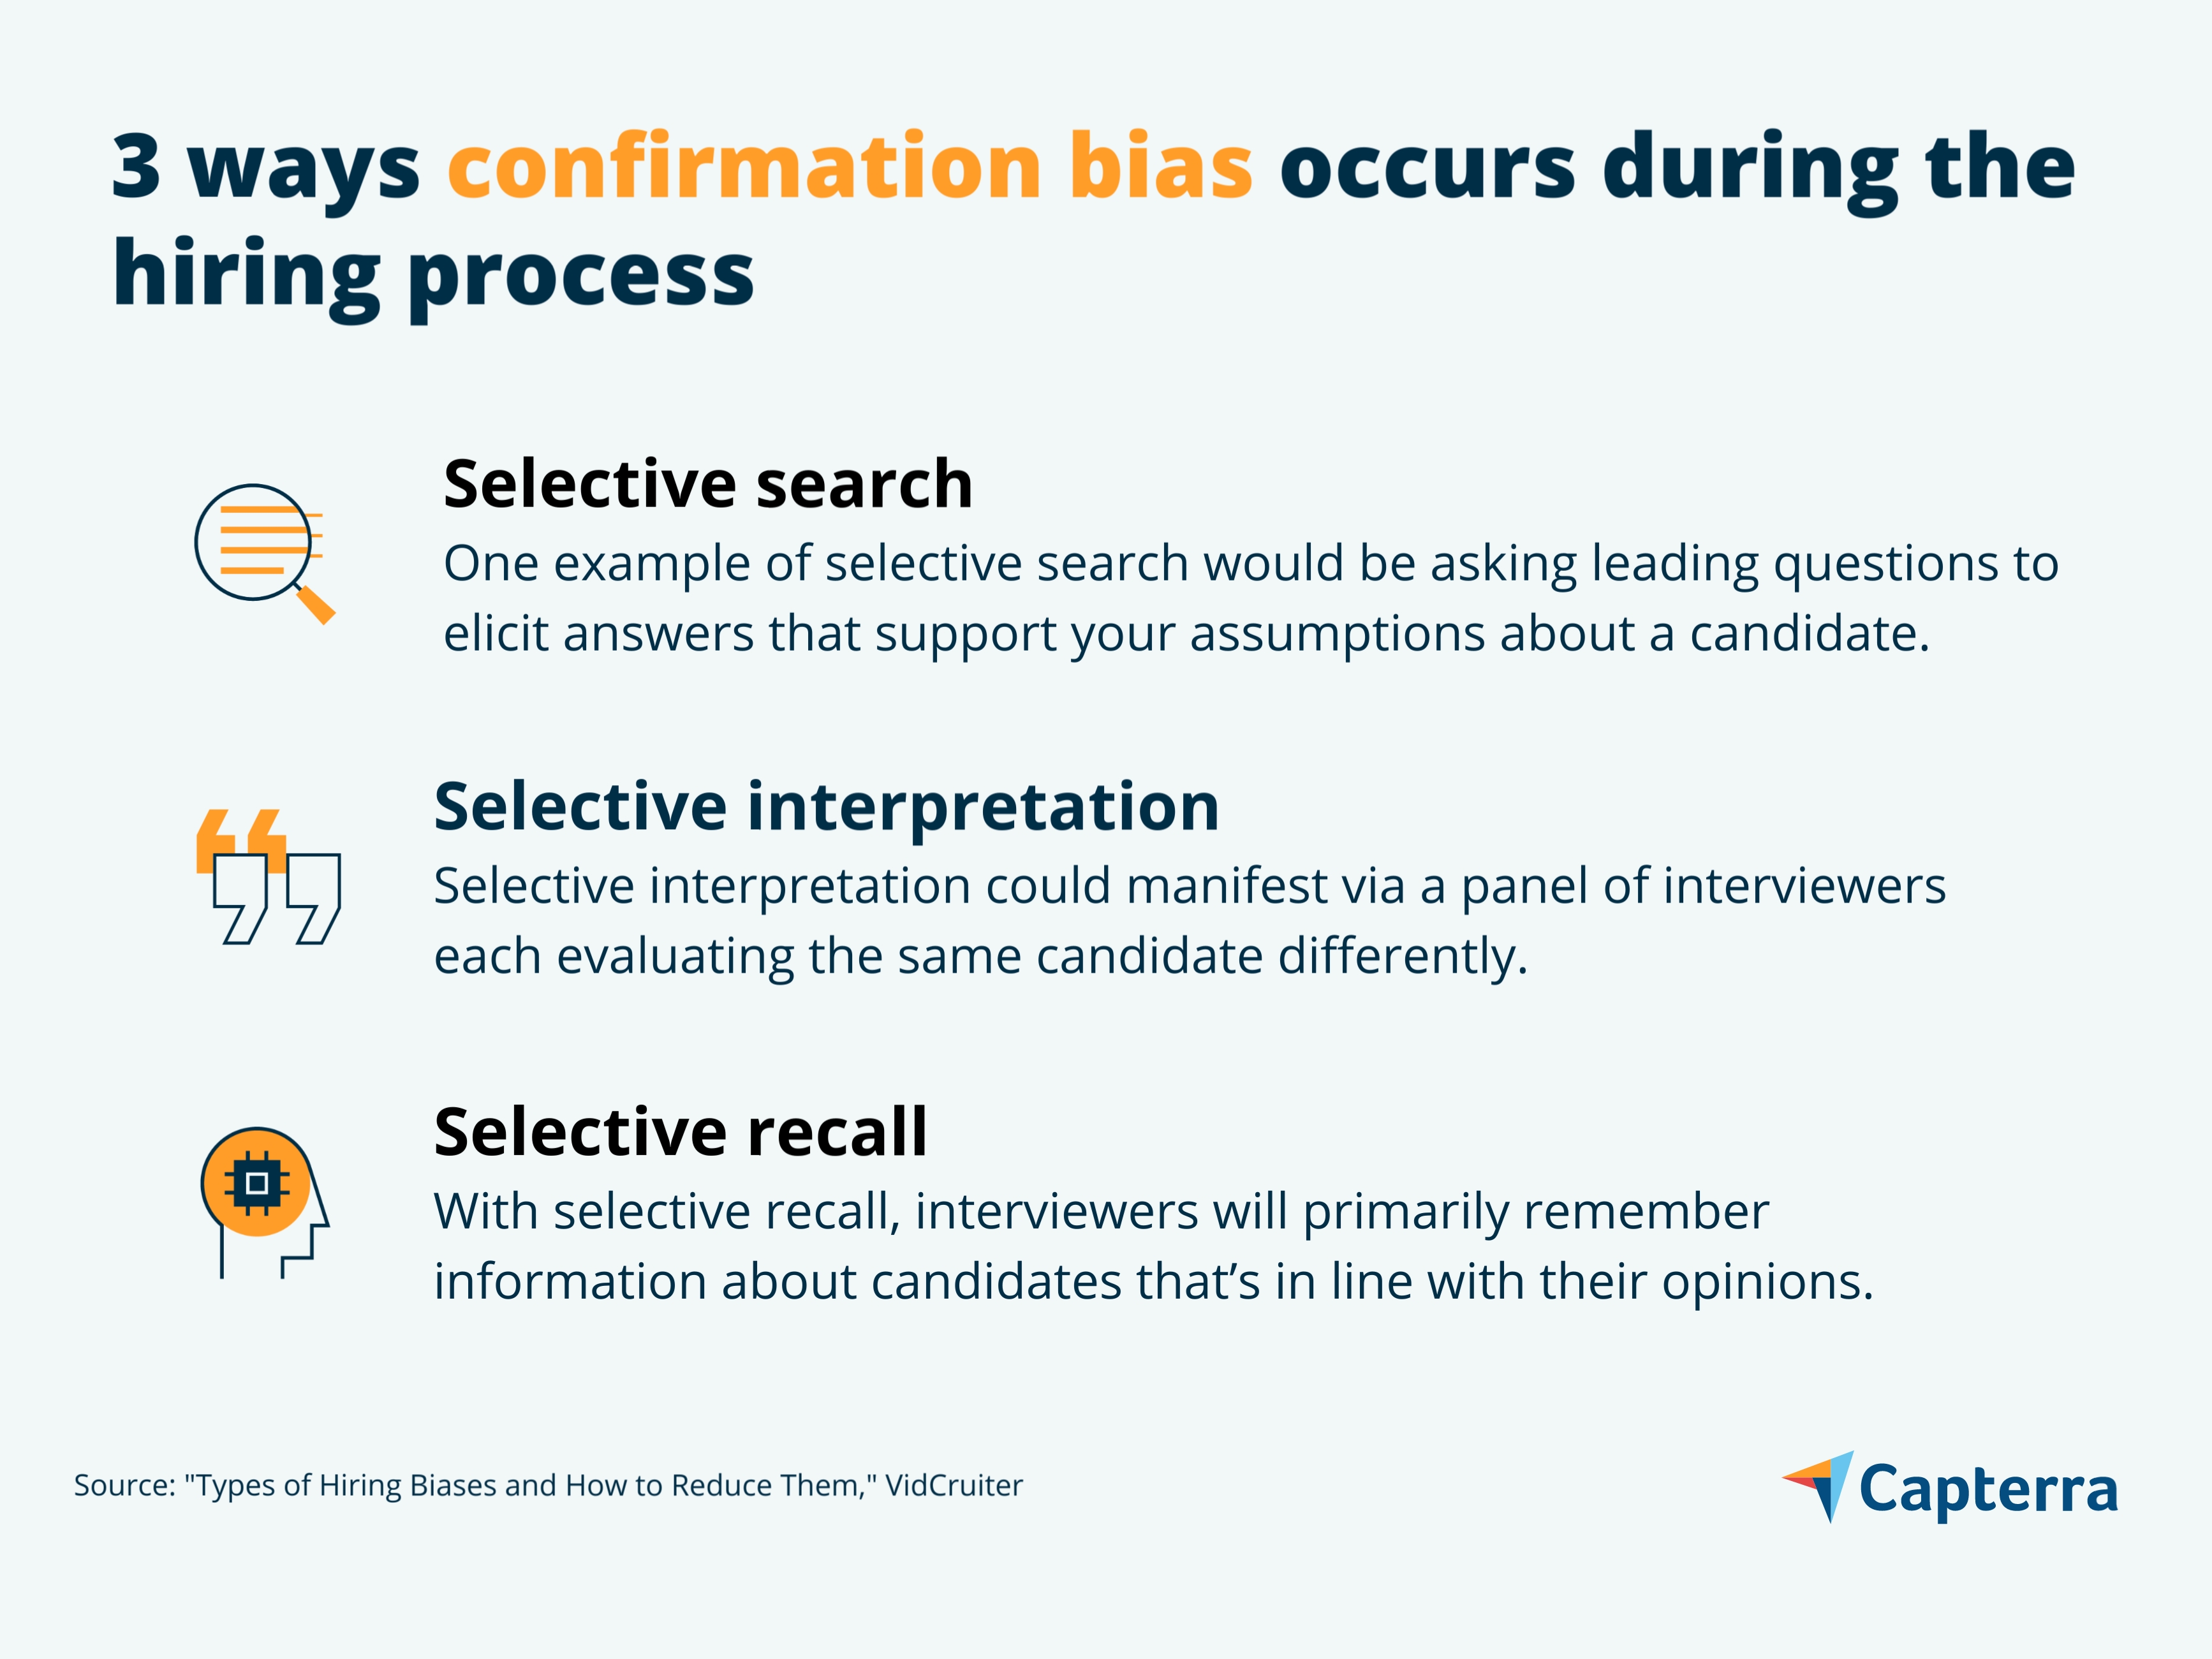 3 ways confirmation bias occurs during the hiring process graphic for the blog article "Hiring Bias: 3 Types Recruiting Leaders Should Be Aware Of"